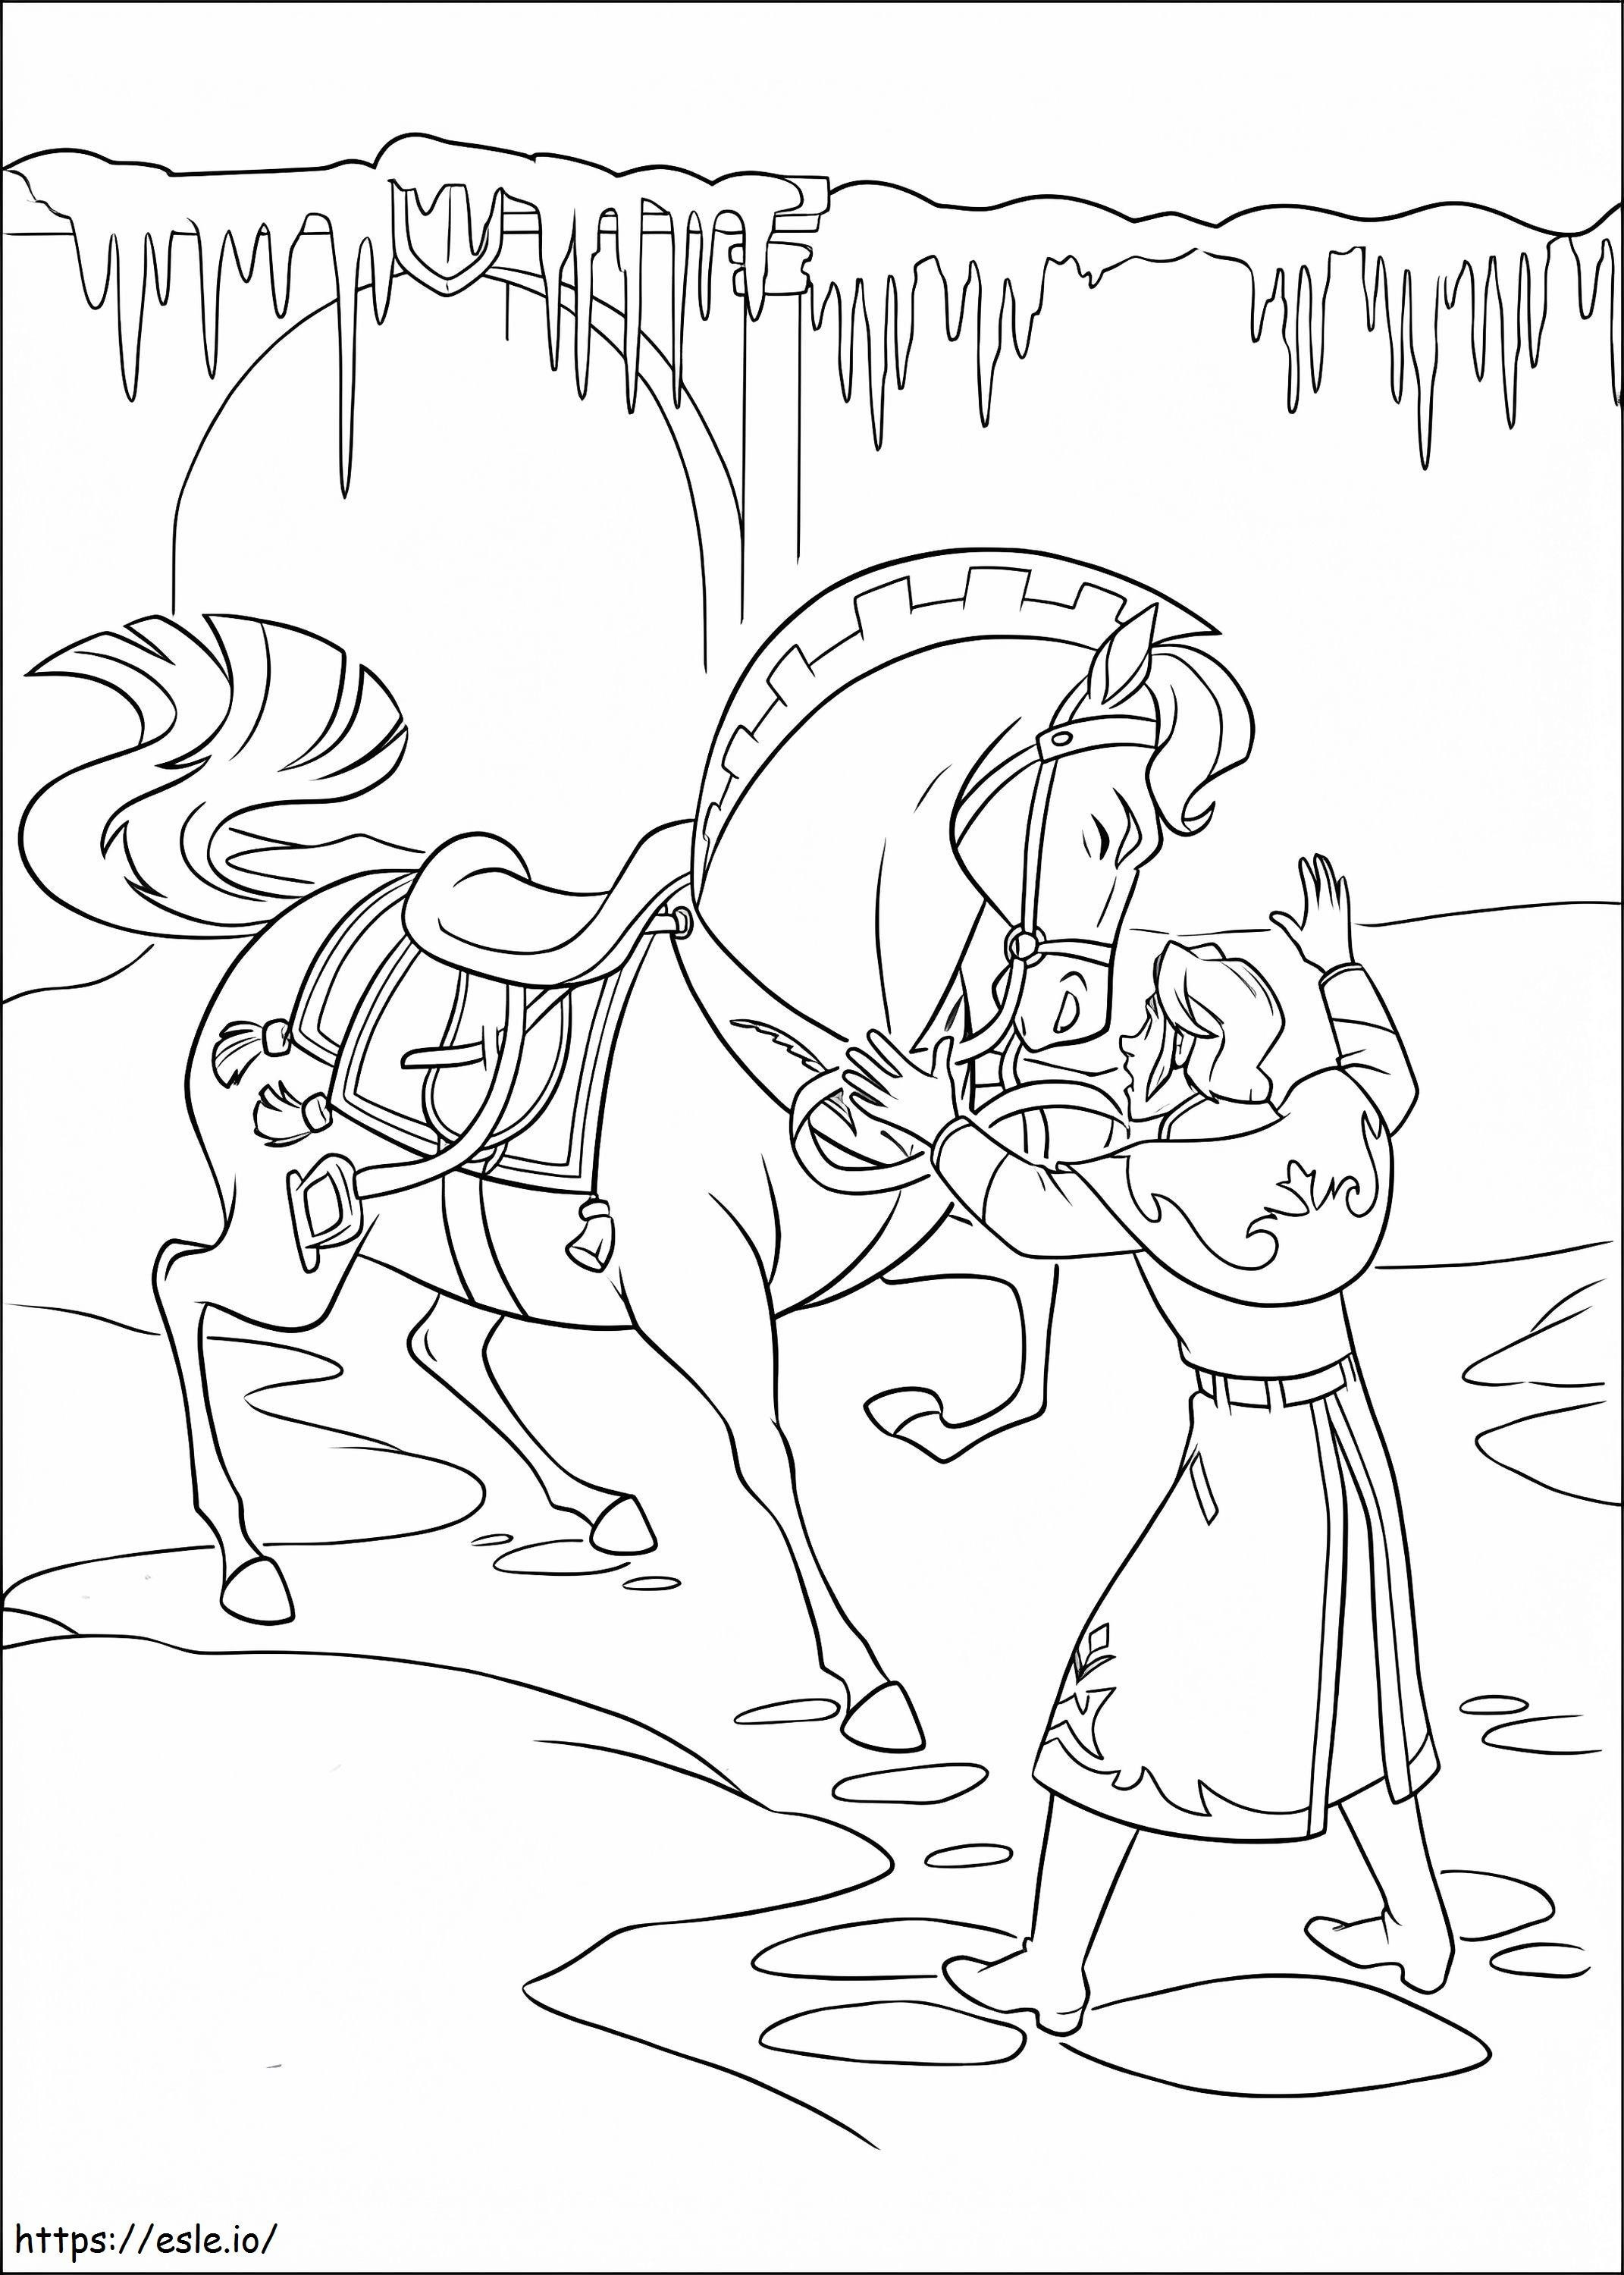 Hans And Lemon coloring page